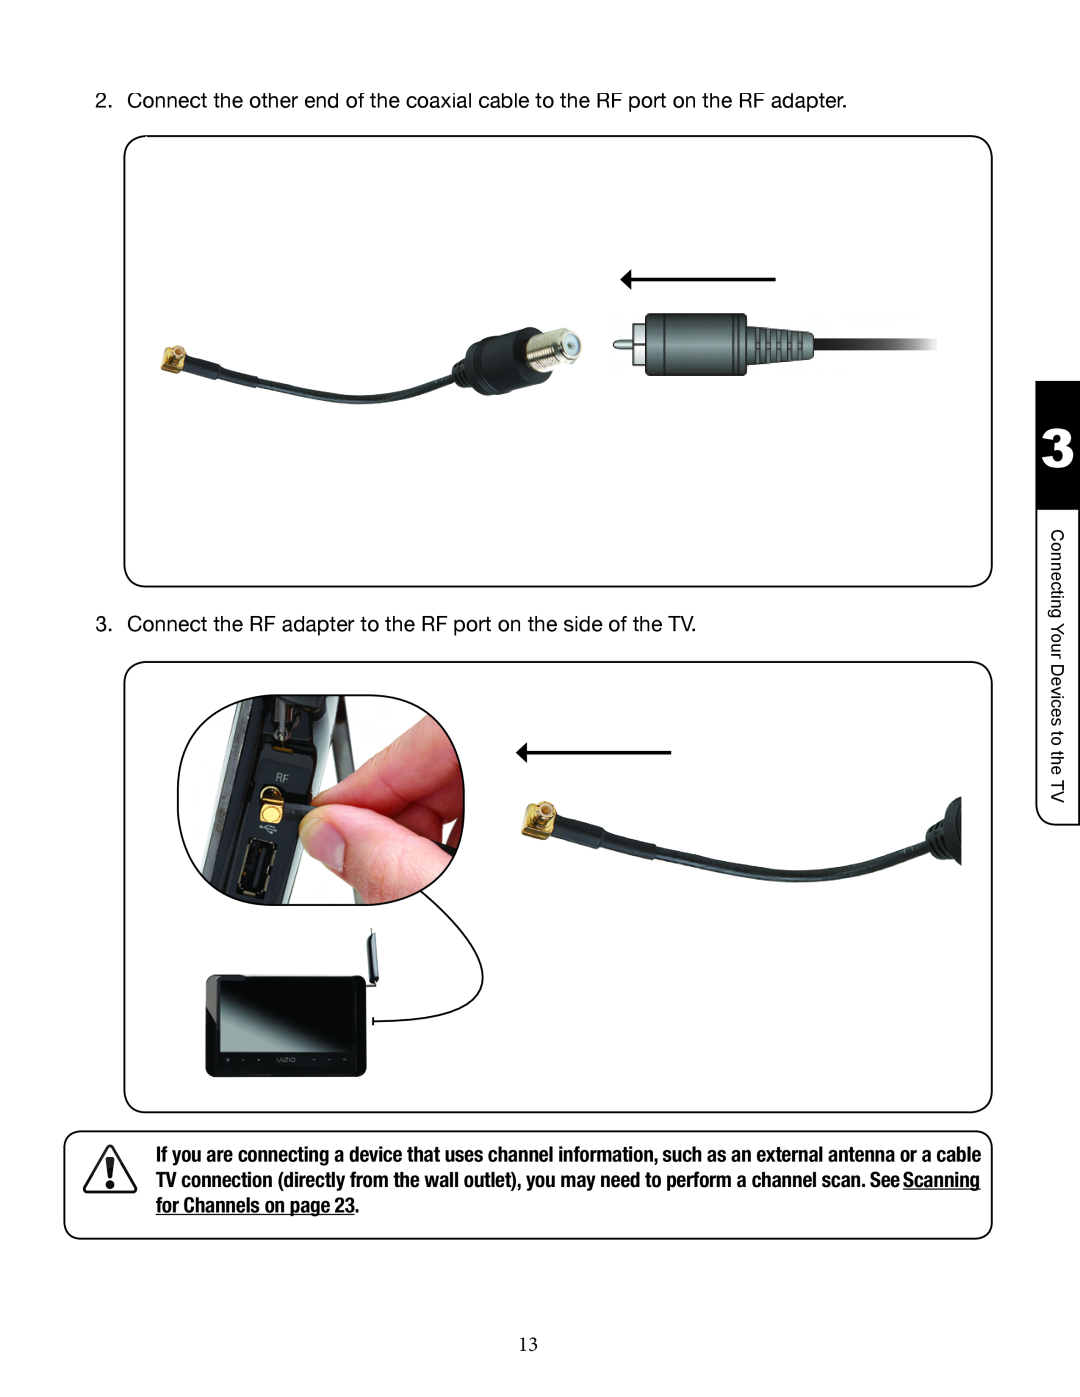 Zanussi VMB070 manual Connect the RF adapter to the RF port on the side of the TV 